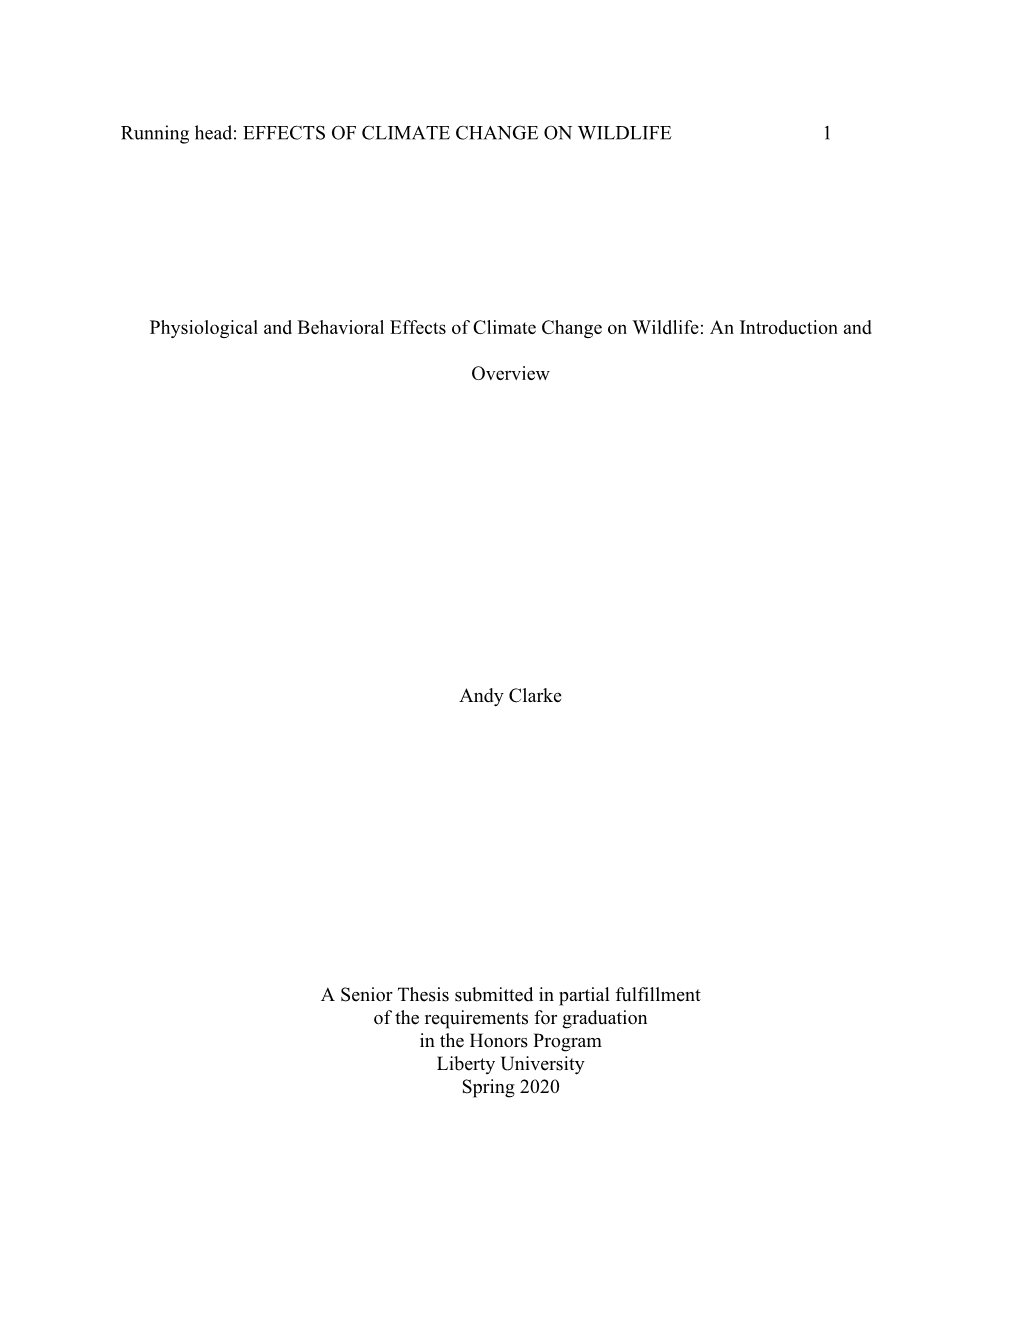 Physiological and Behavioral Effects of Climate Change on Wildlife: an Introduction And